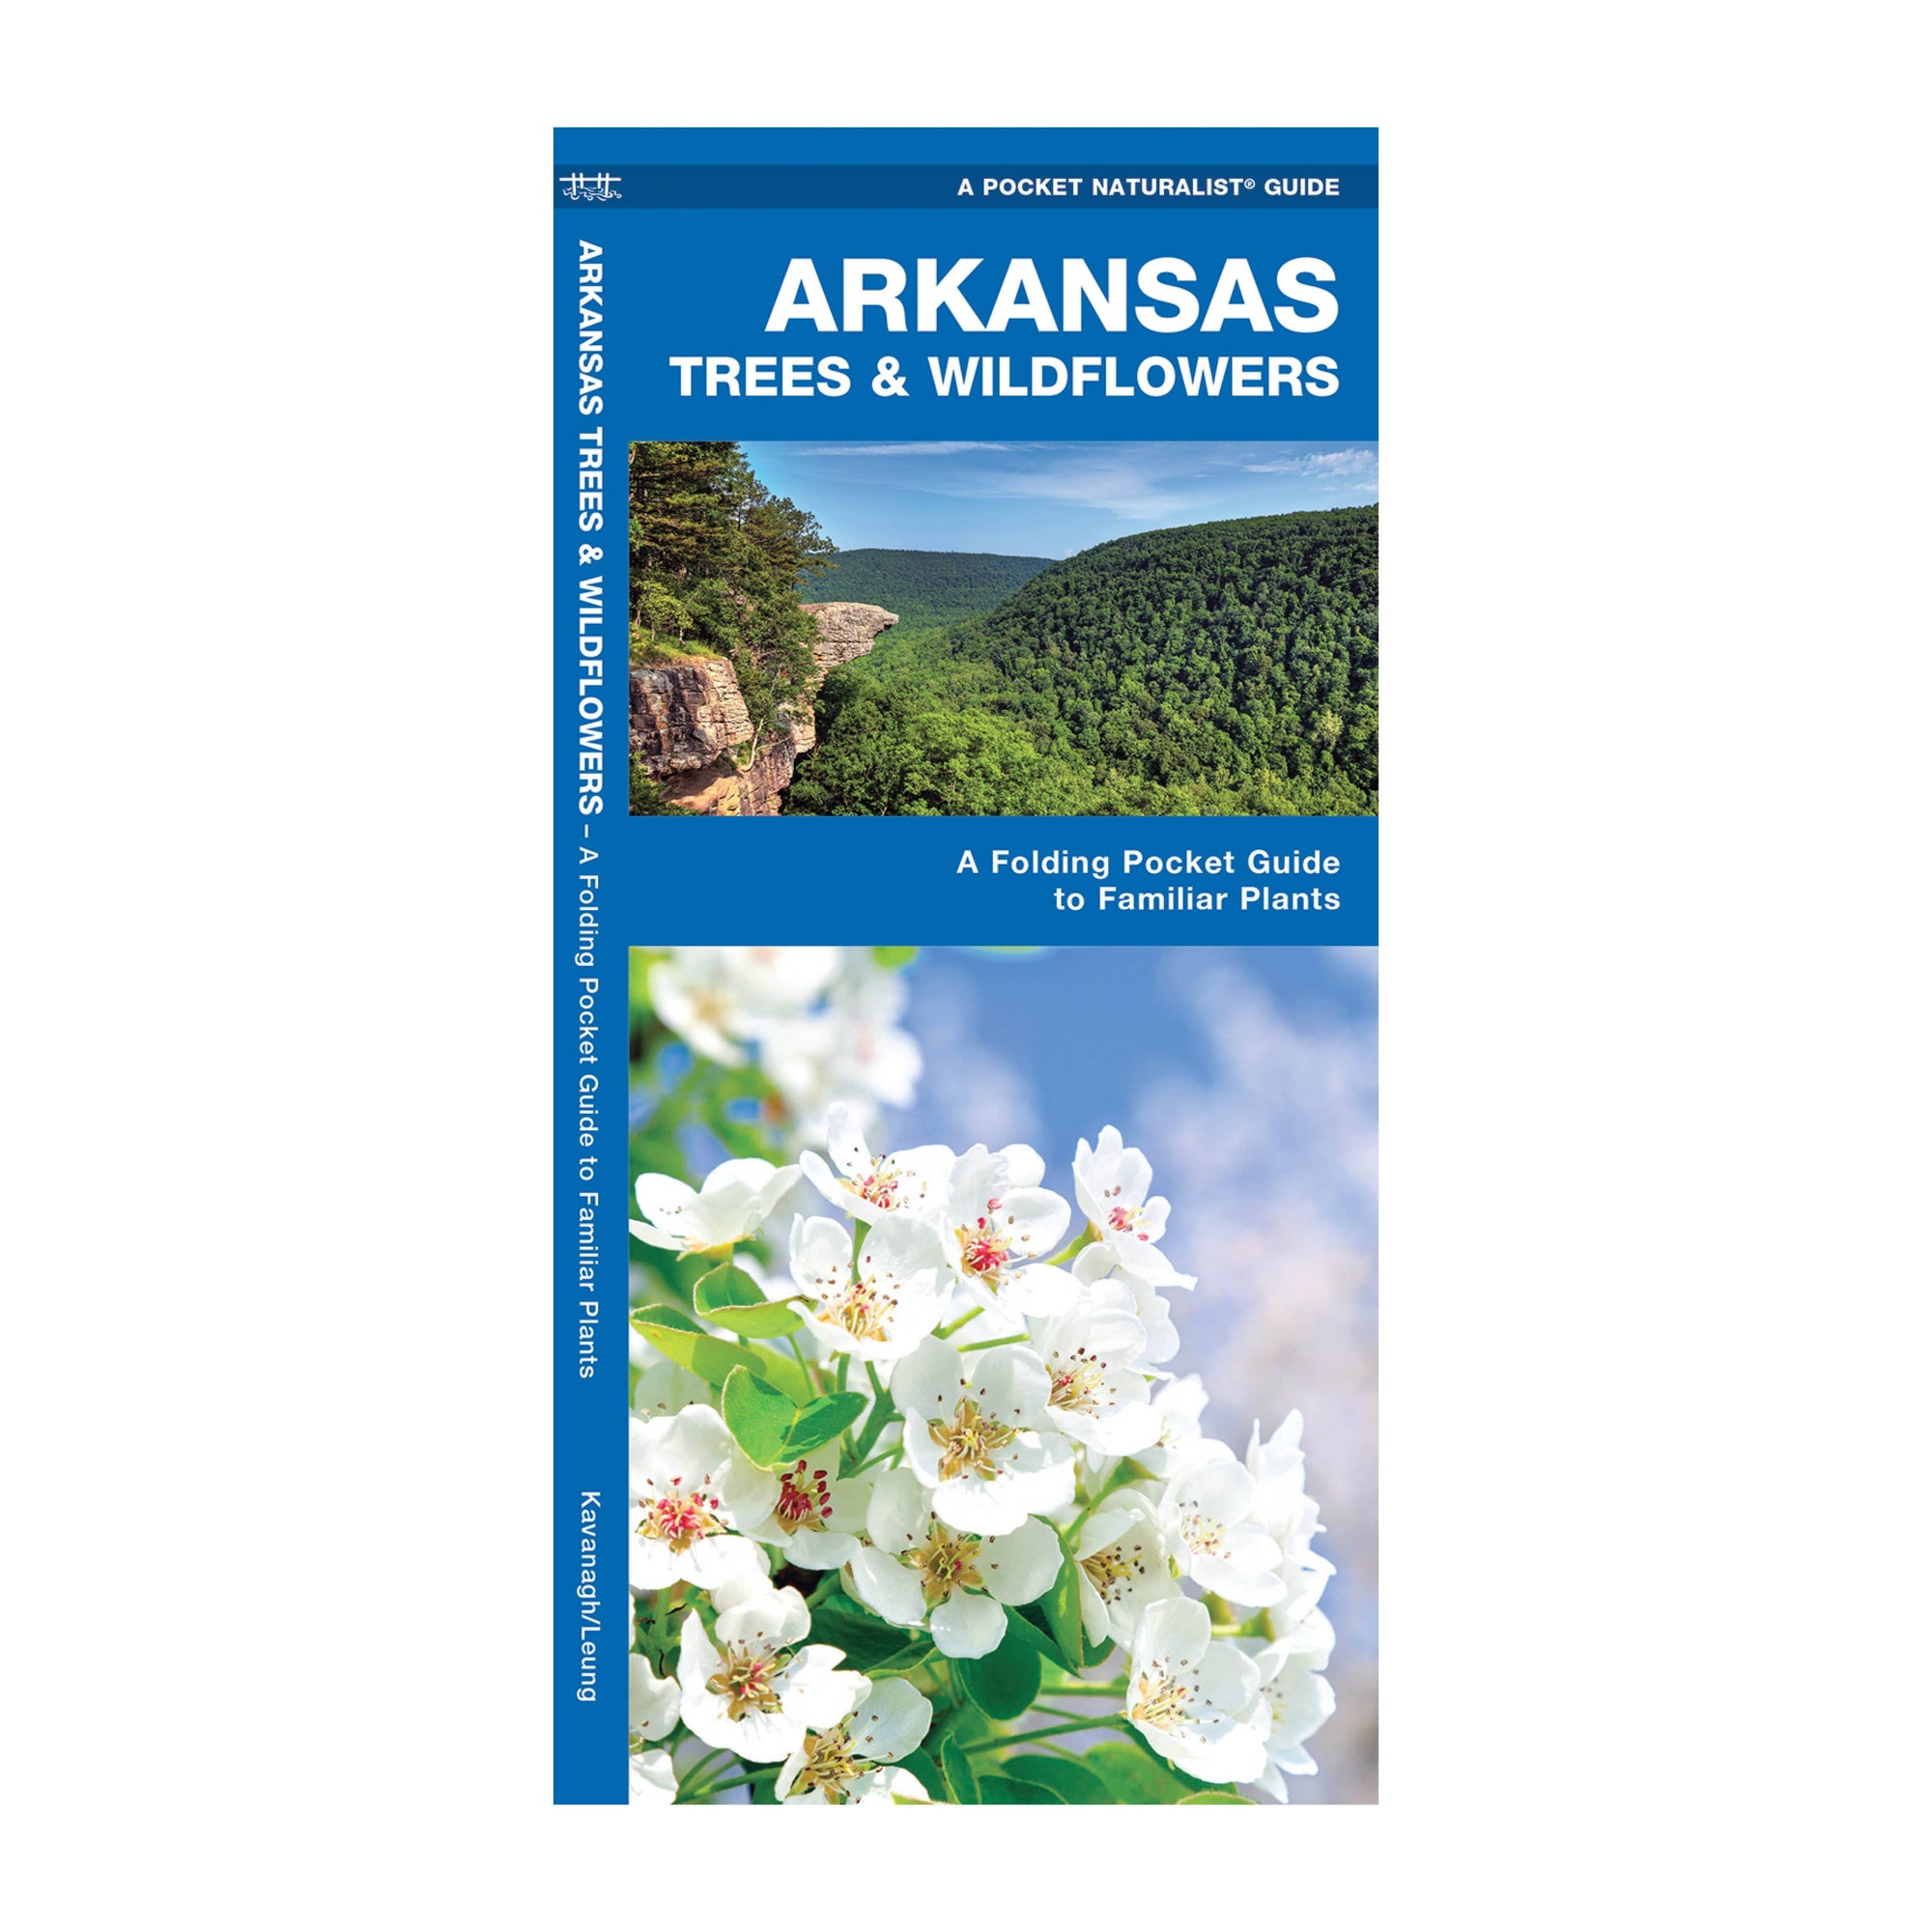 Arkansas Trees & Wildflowers, featuring a scenic view of a forested gorge and close-up of Arkansas wildflowers.